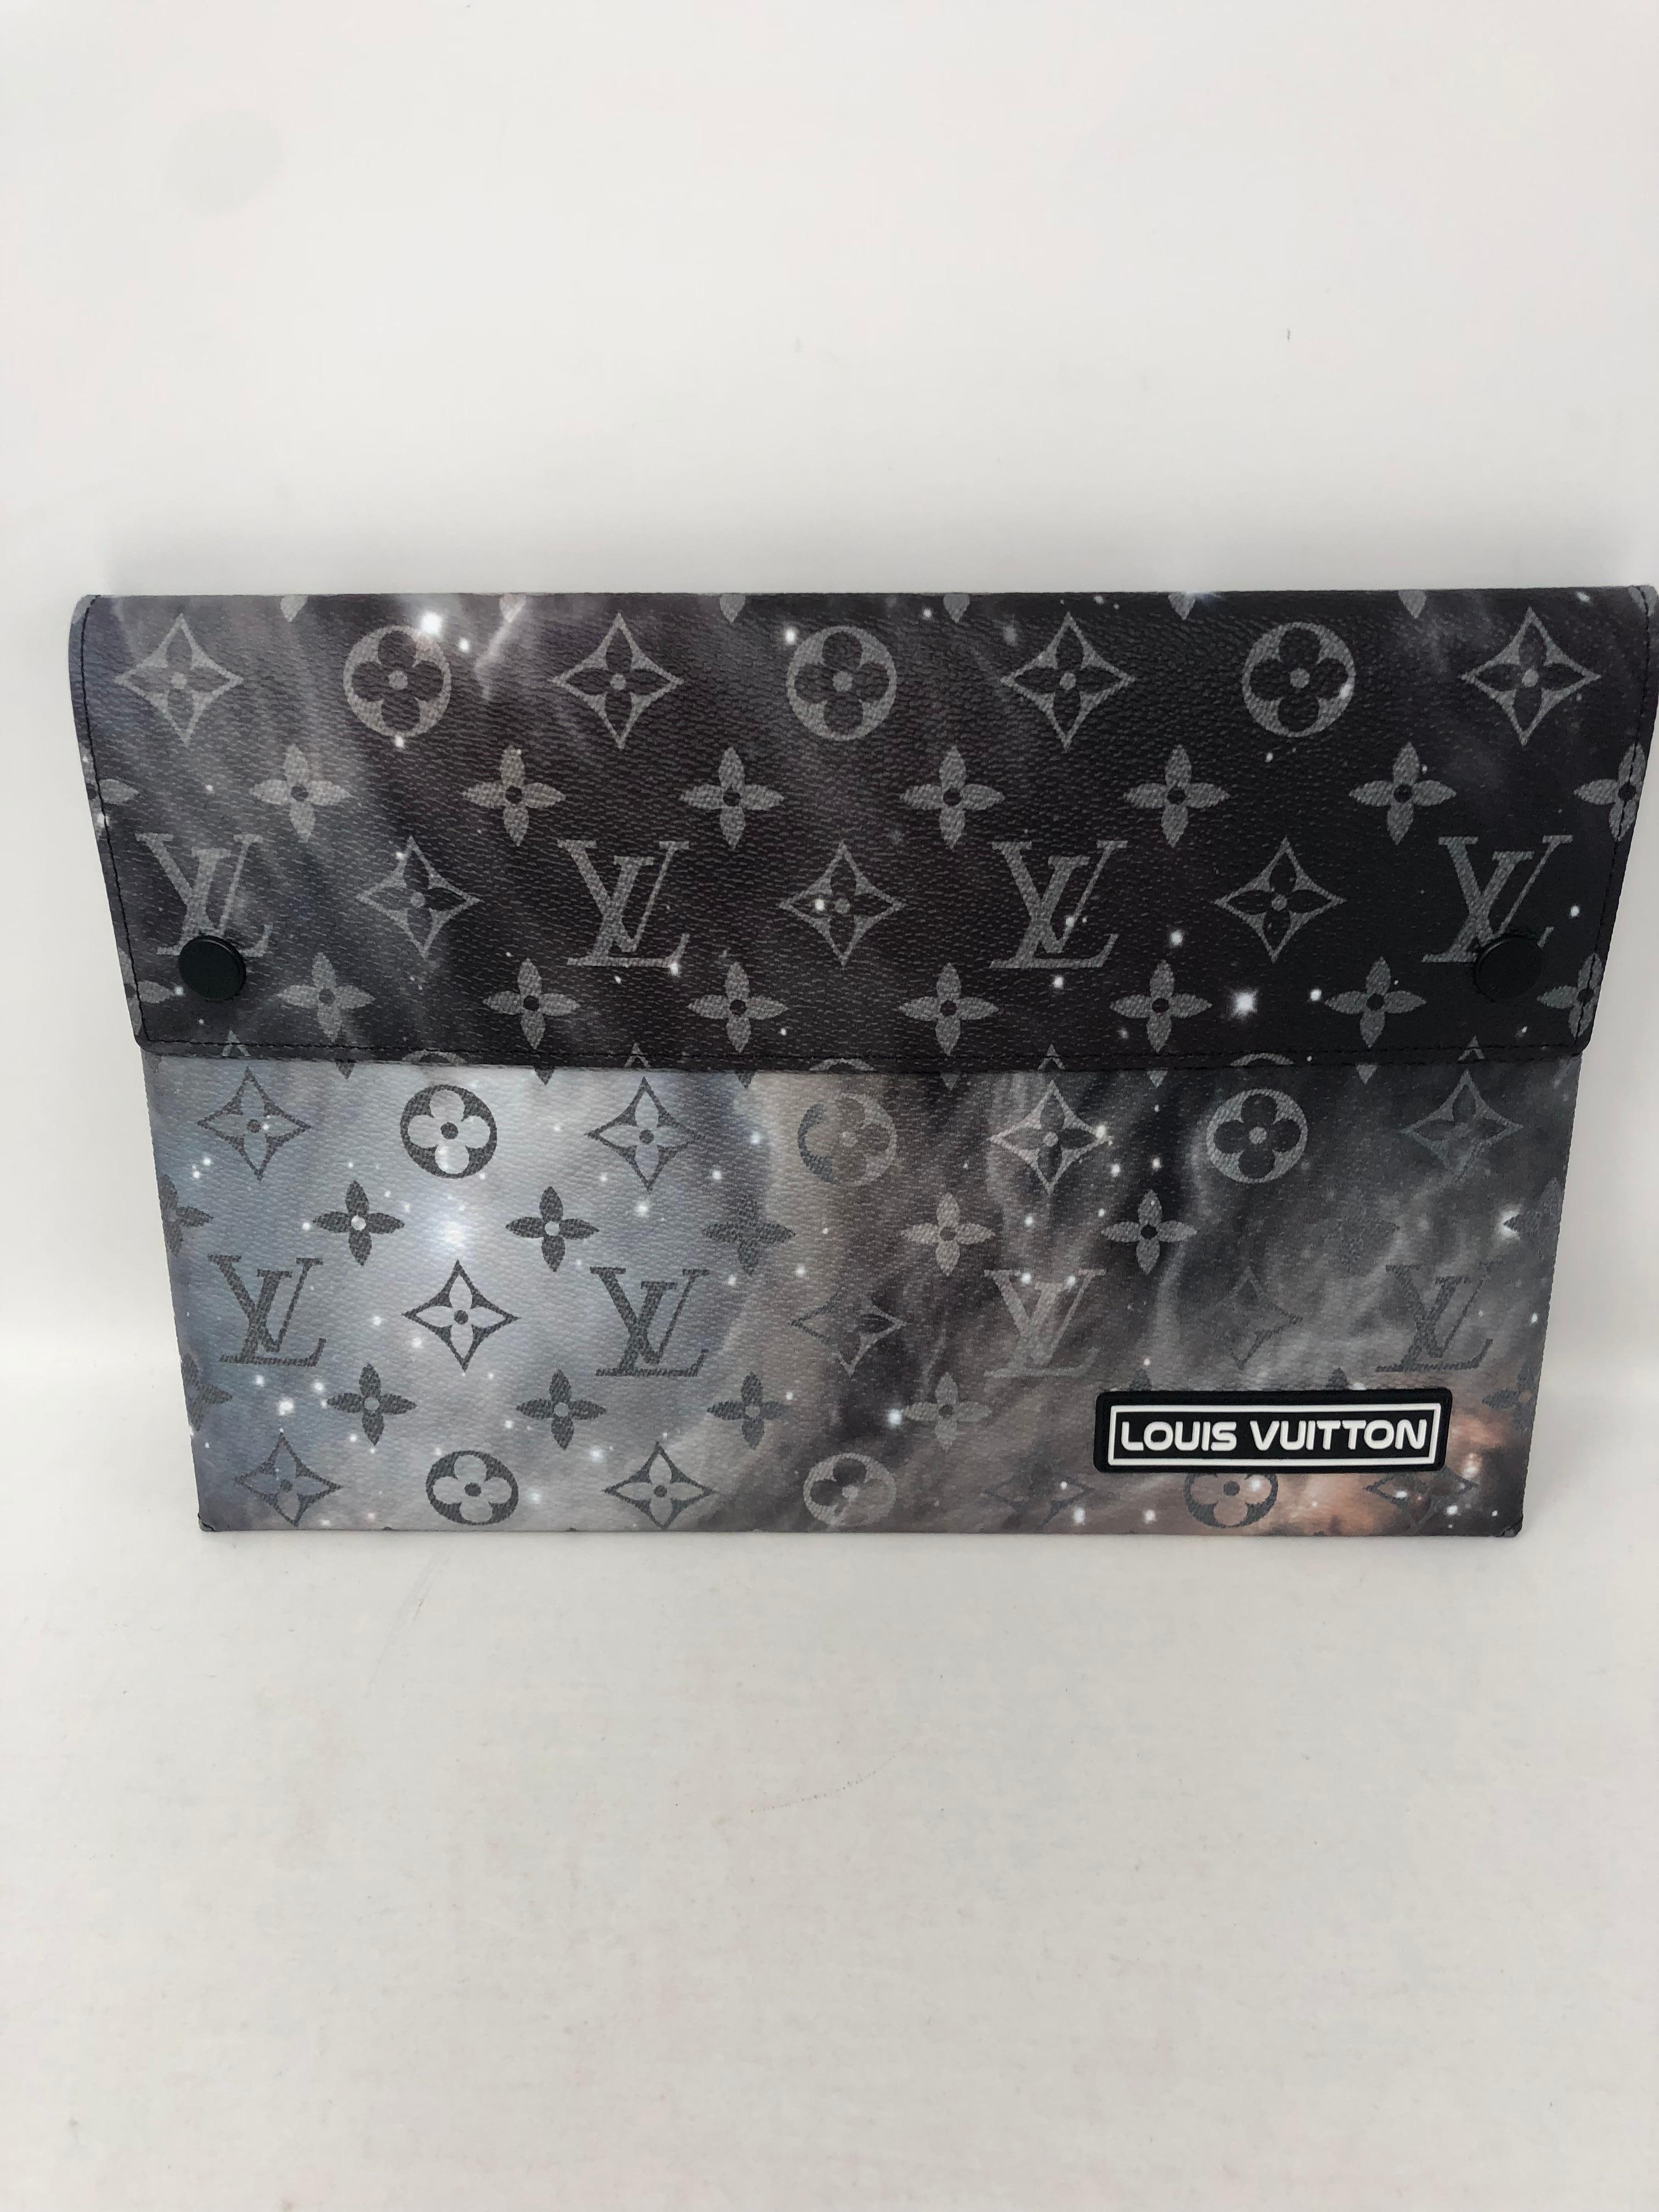 Louis Vuitton Pochette Alpha Monogram Galaxy Collection. Set of 3 pouches in monogram galaxy black multicolor. Can be worn as a clutch or small accessory for a larger bag. Selling the whole set together. Brand new and sold out. Limited edition.